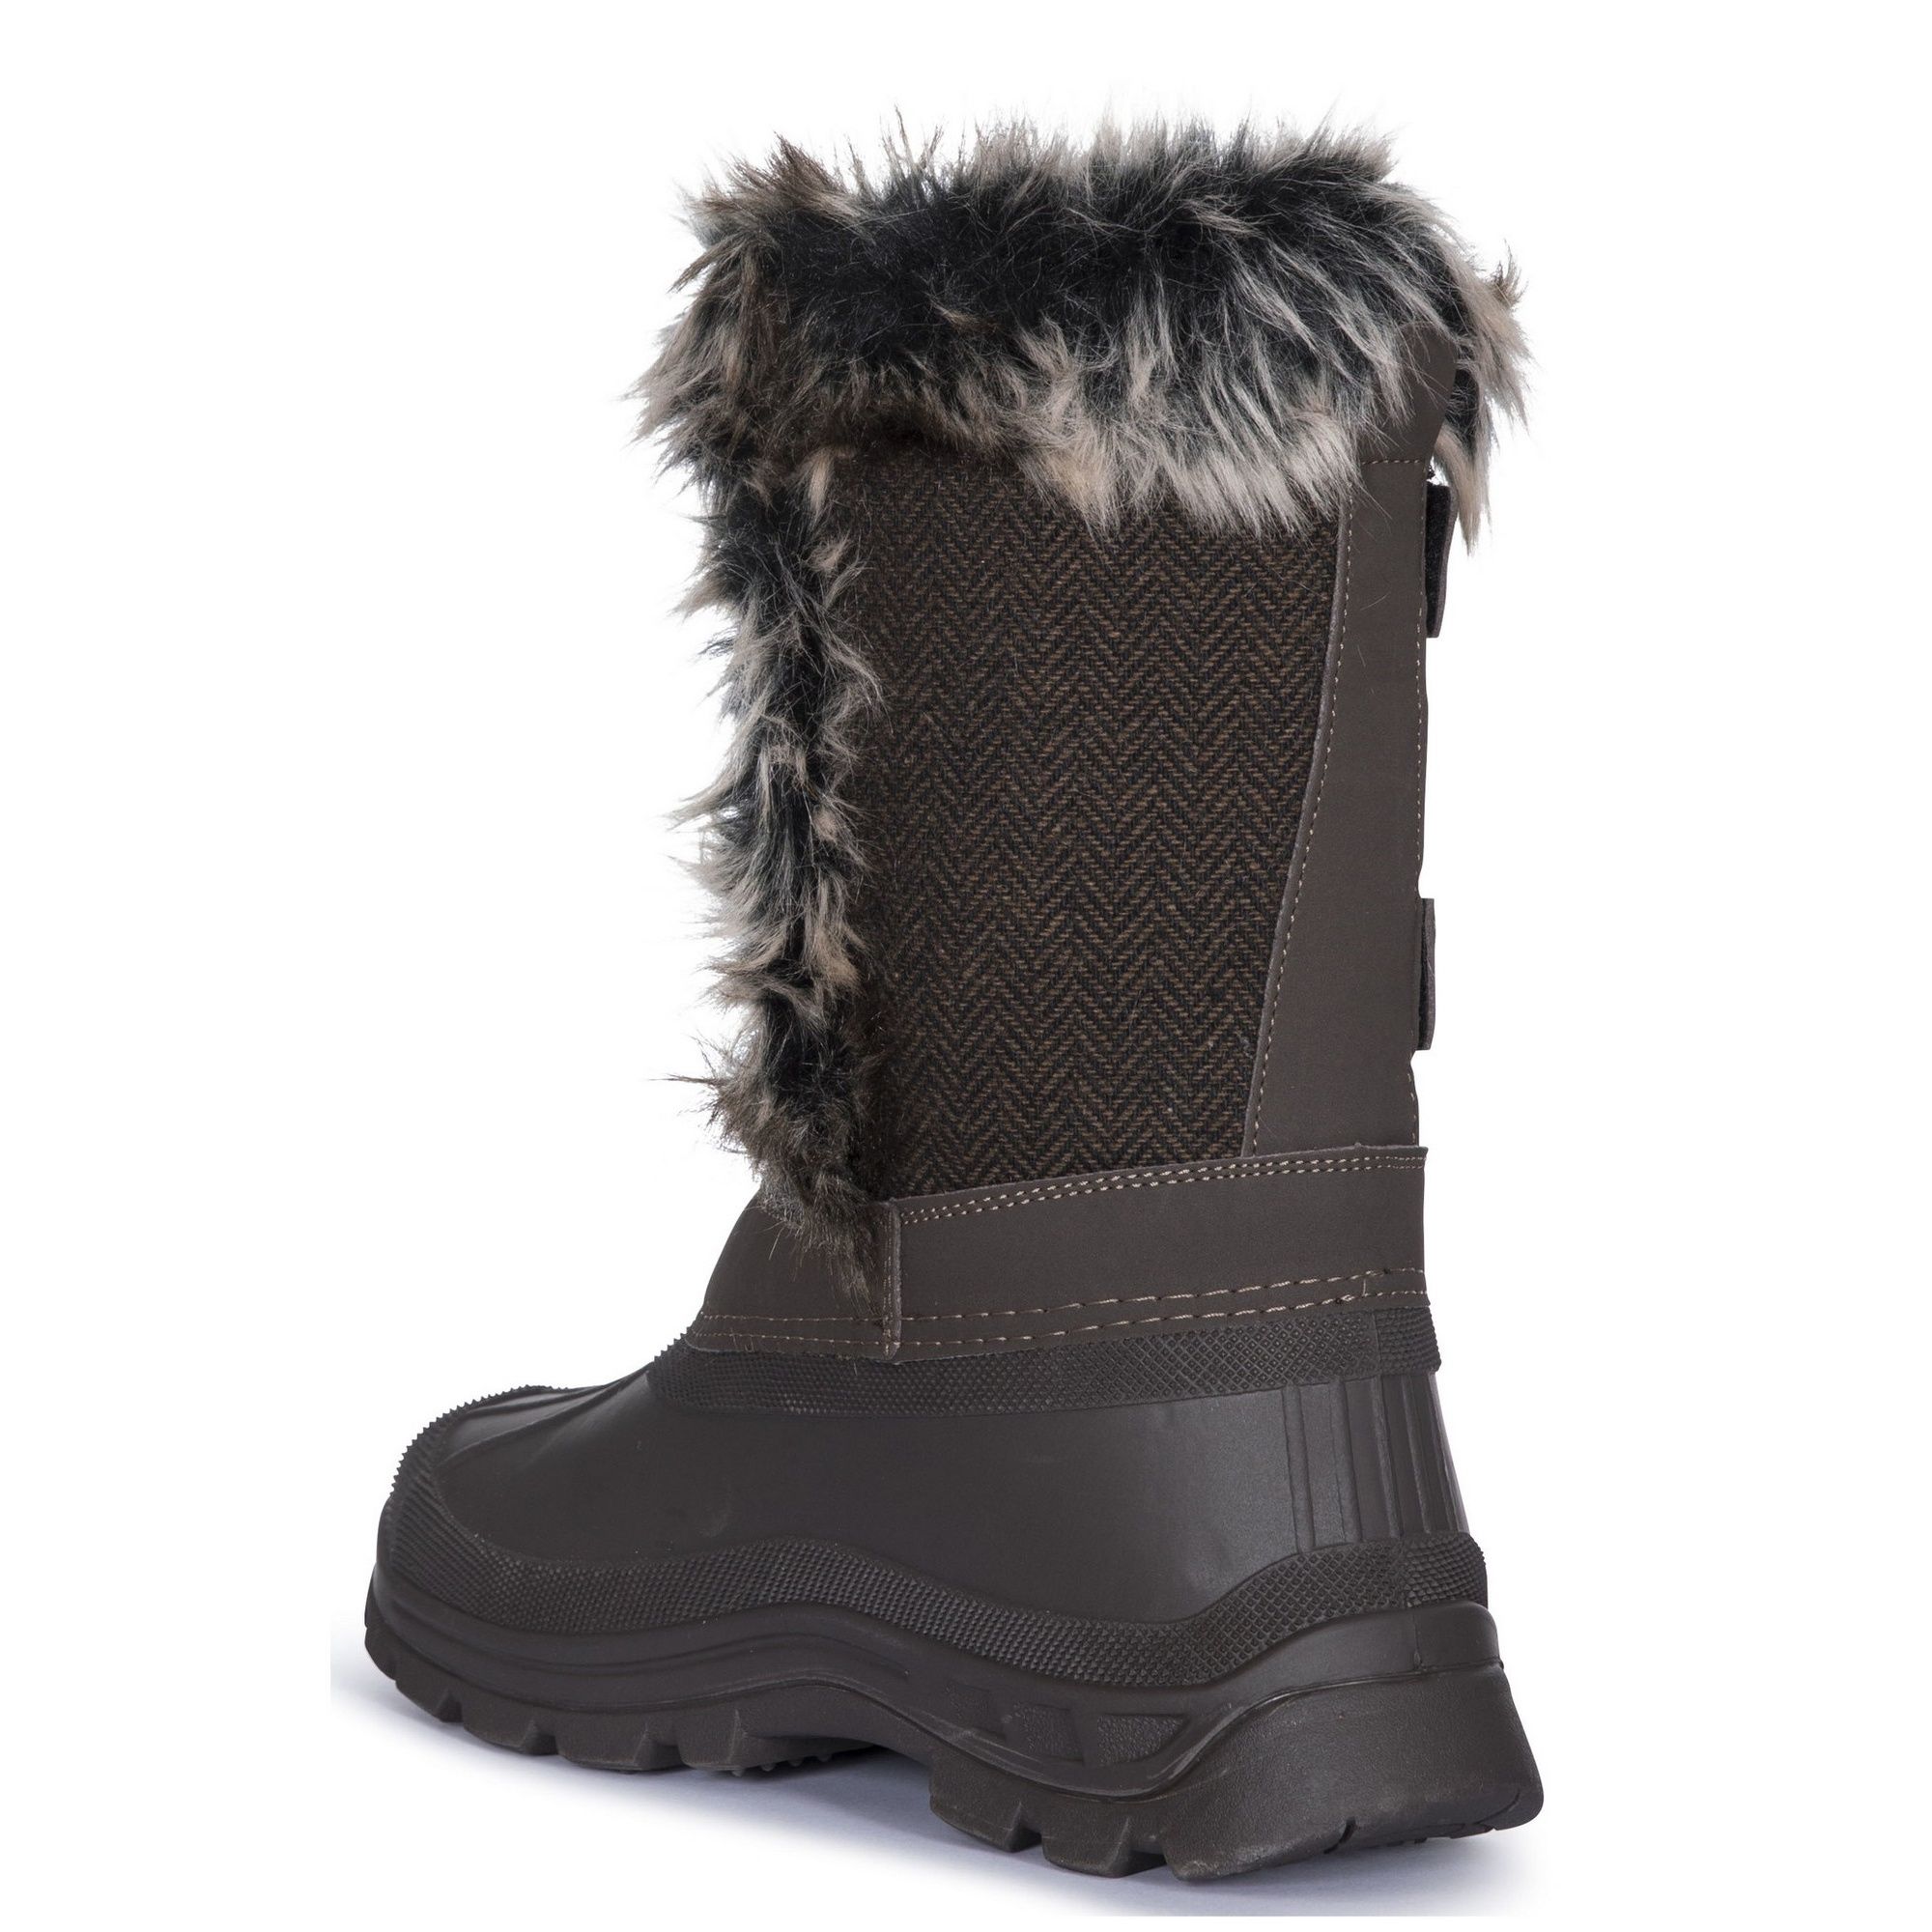 Womens snowboot. Insulated and warm fleece lined. Water resistant textile upper. Waterproof rubber shell outsole. Adjustable touch fastening. Synthetic fur trim. Upper: PU/Textile/Synthetic Fur, Lining: Fleece, Outsole: Rubber.